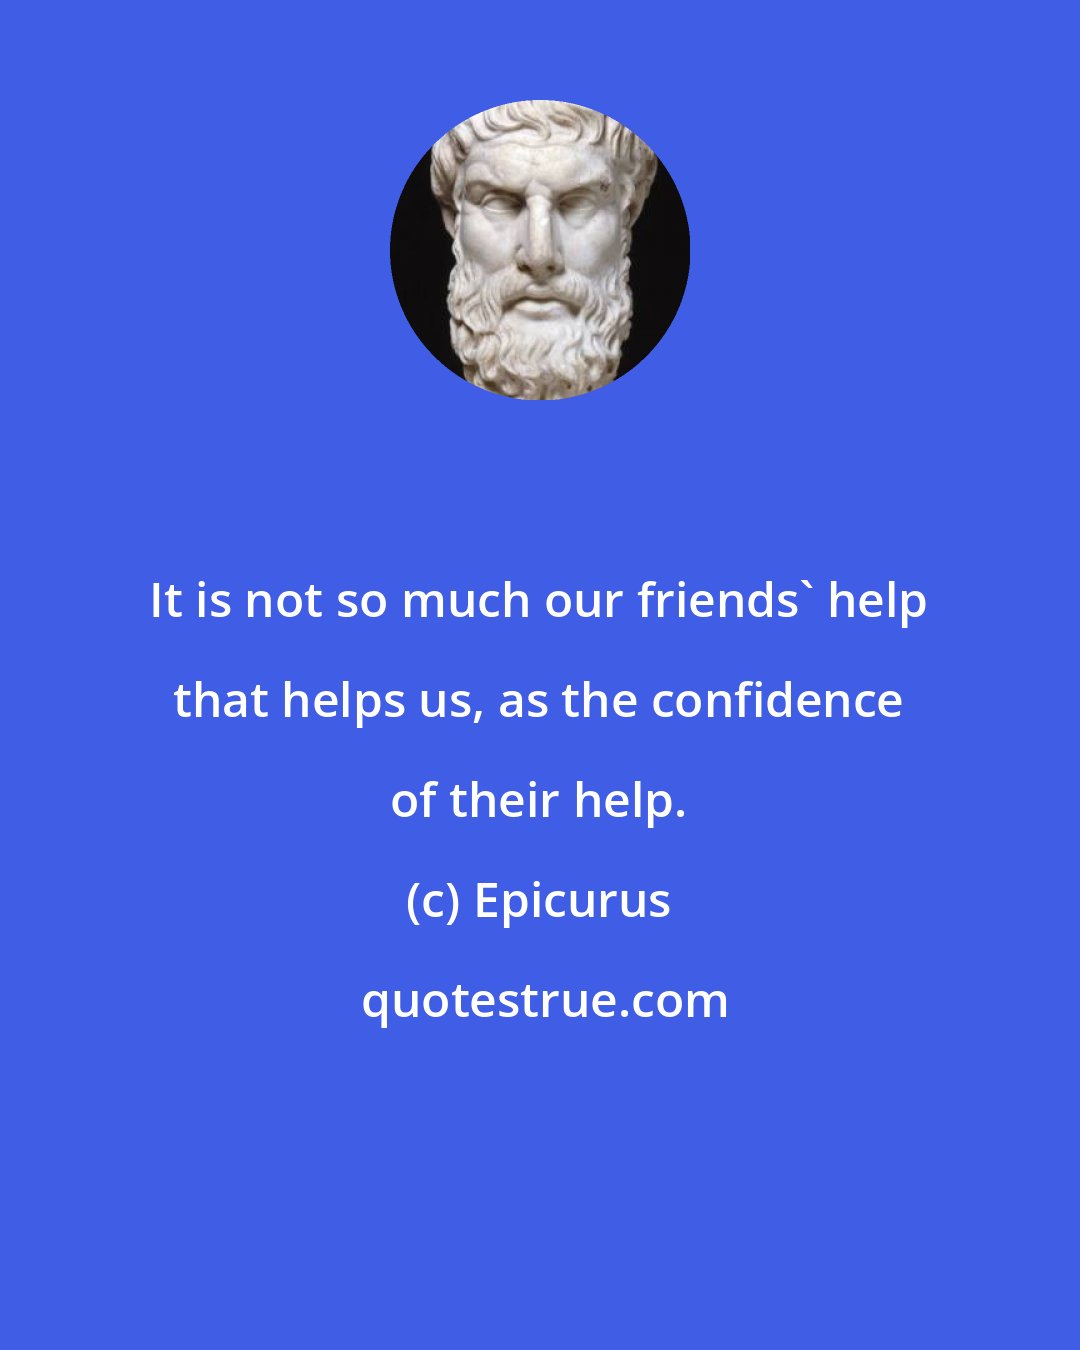 Epicurus: It is not so much our friends' help that helps us, as the confidence of their help.